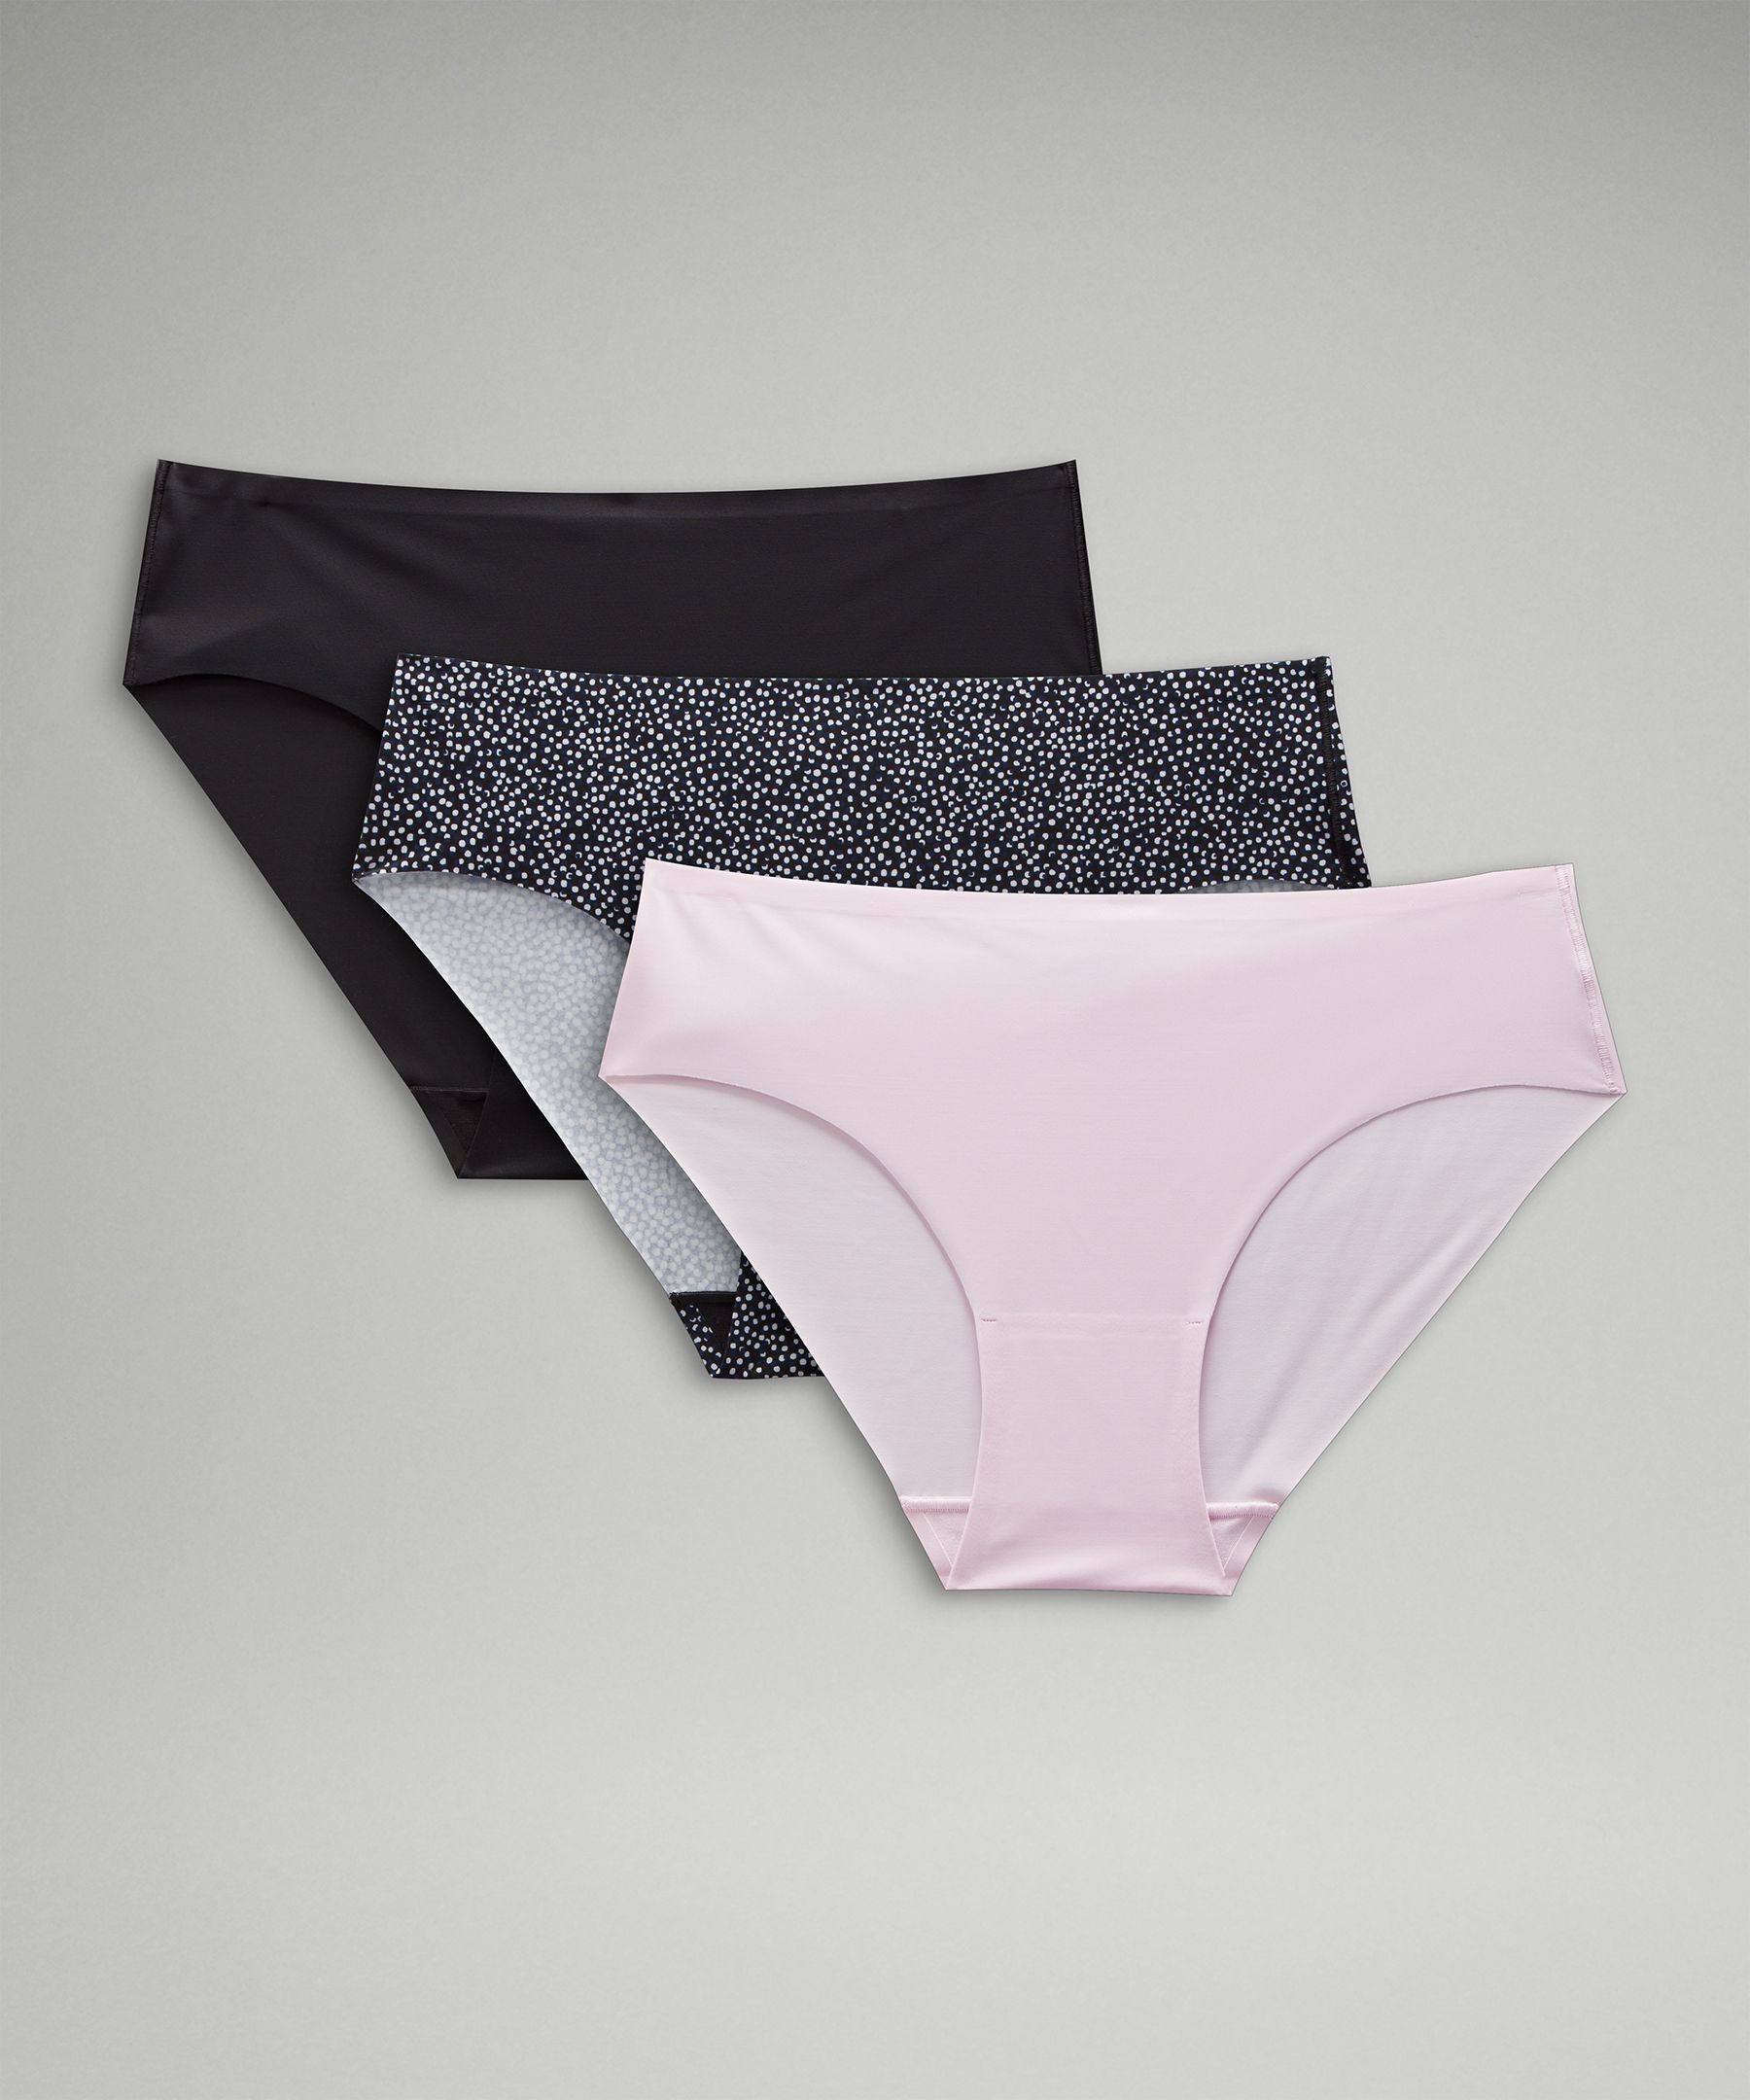 Lululemon athletica InvisiWear Mid-Rise Hipster Underwear 3 Pack, Women's